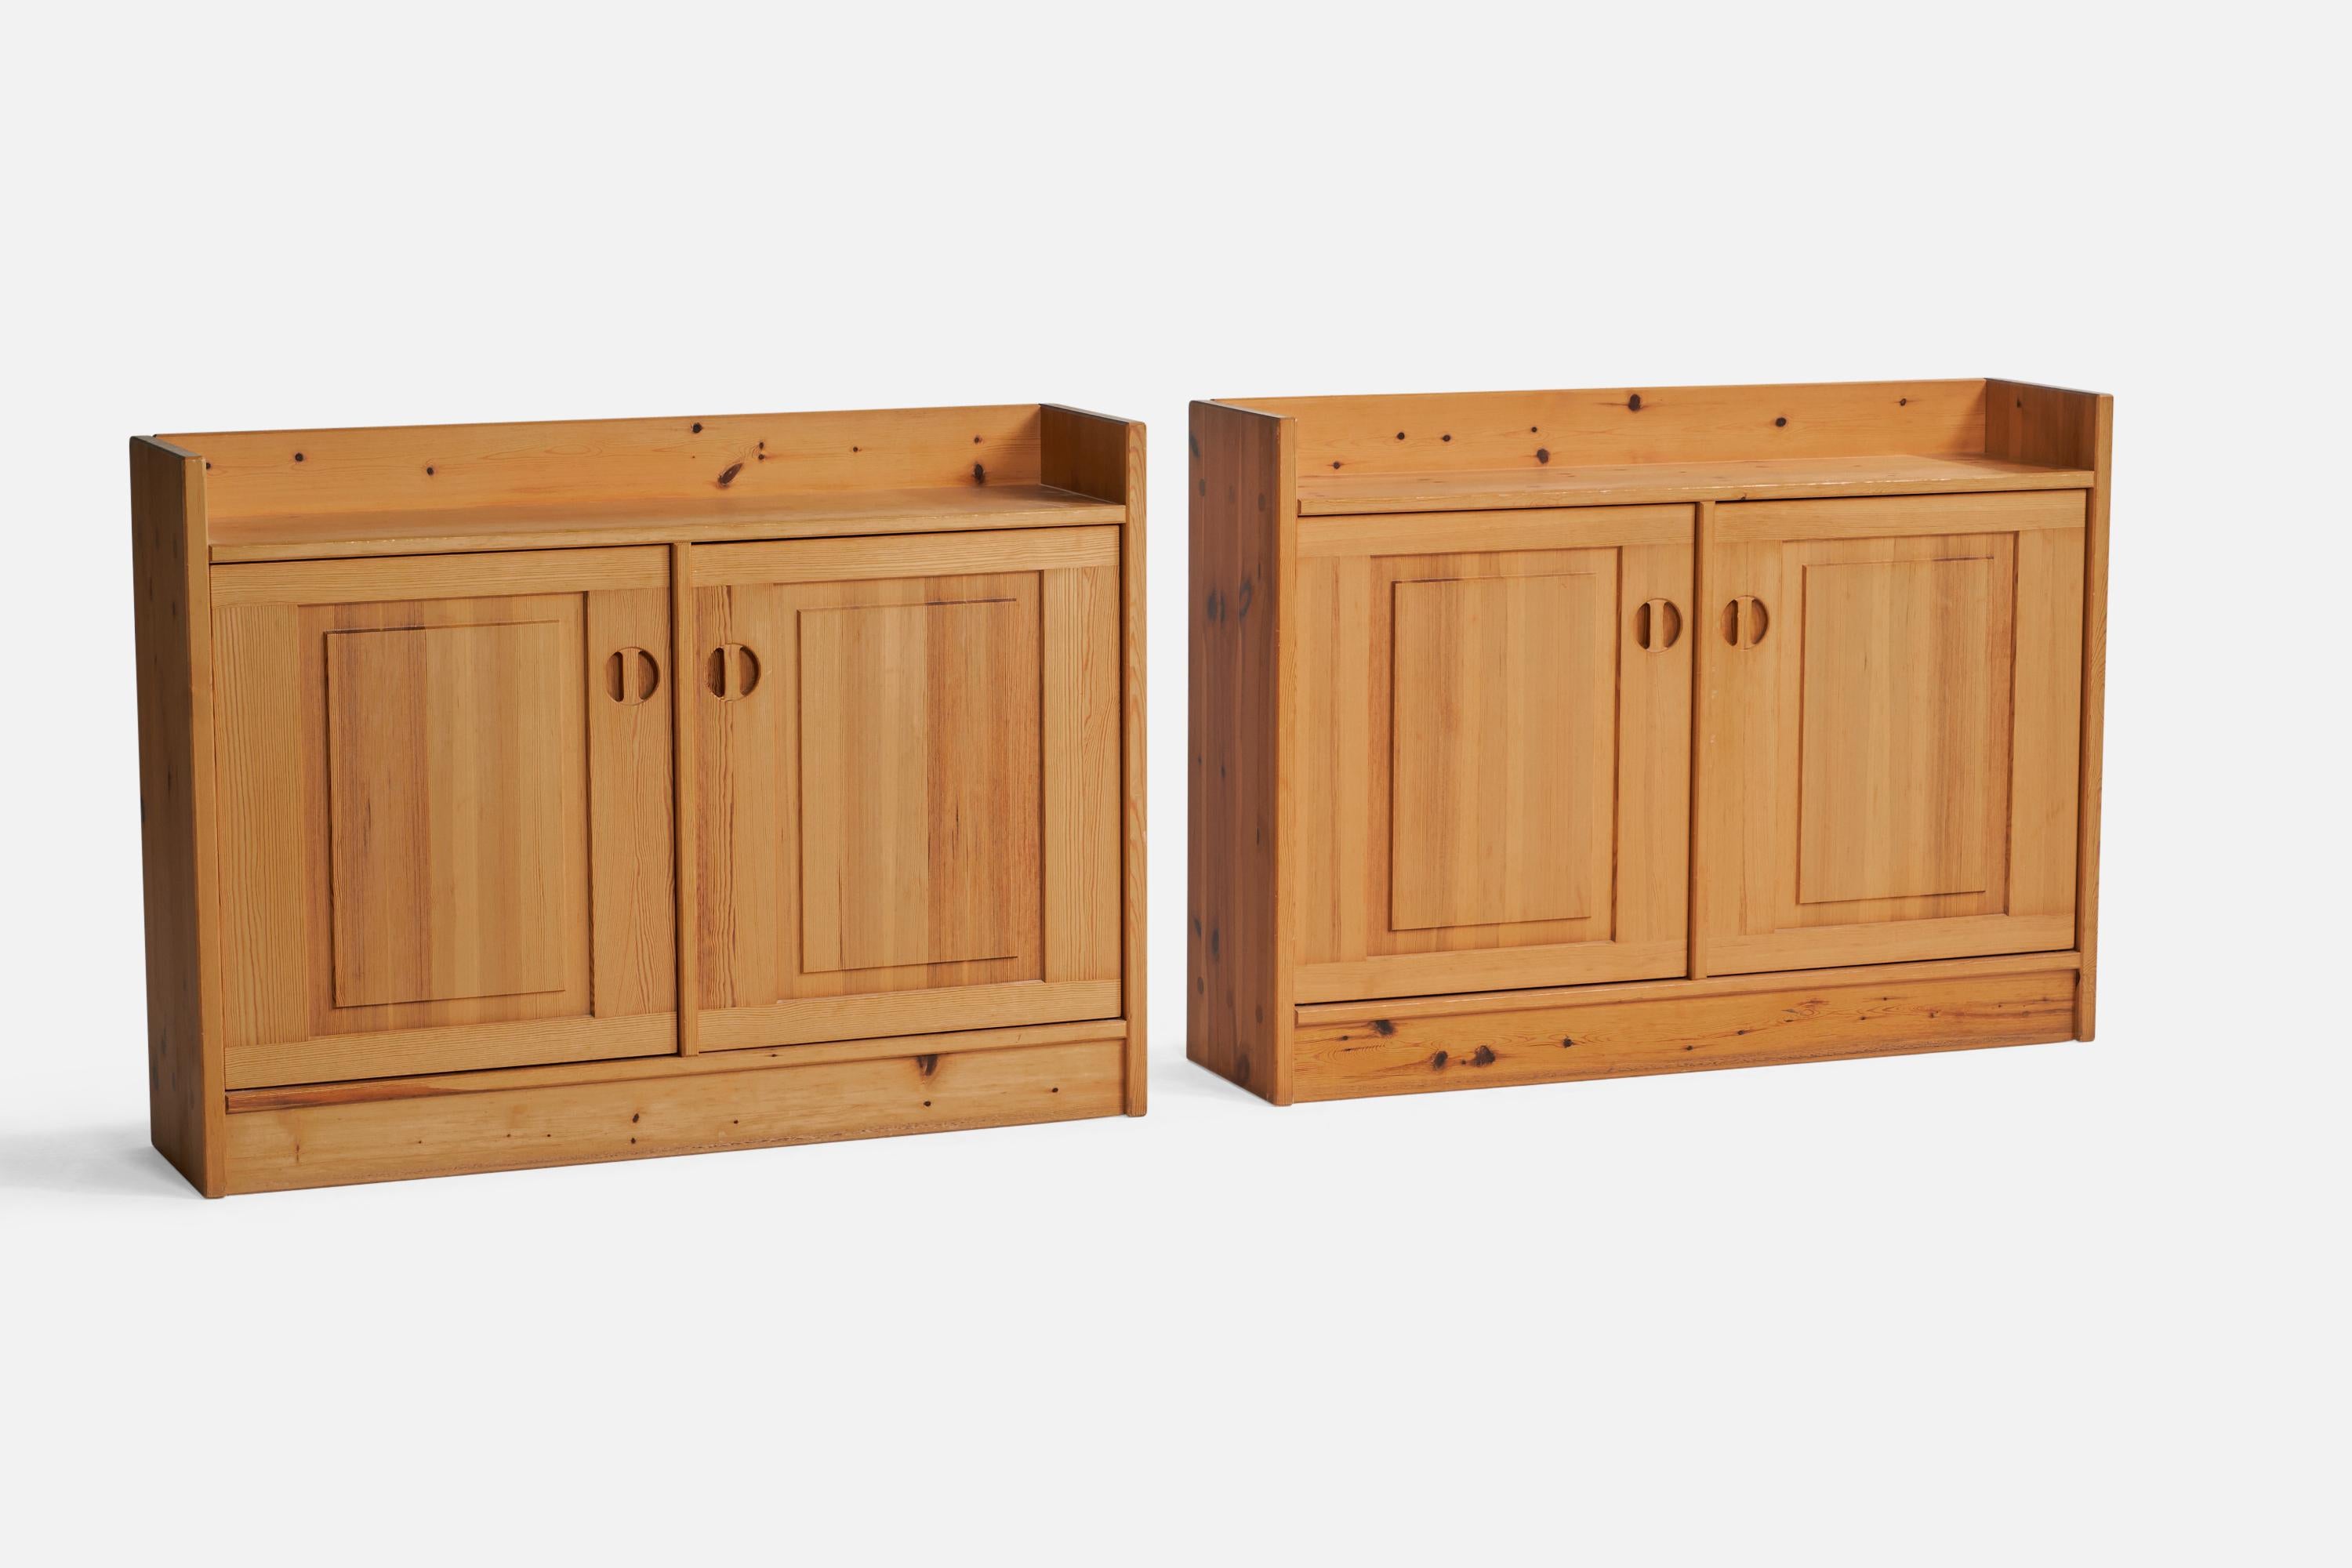 A pair of pine cabinets designed by Göran Malmwall and produced by Karl Andersson & Söner, Sweden, c. 1960s.

